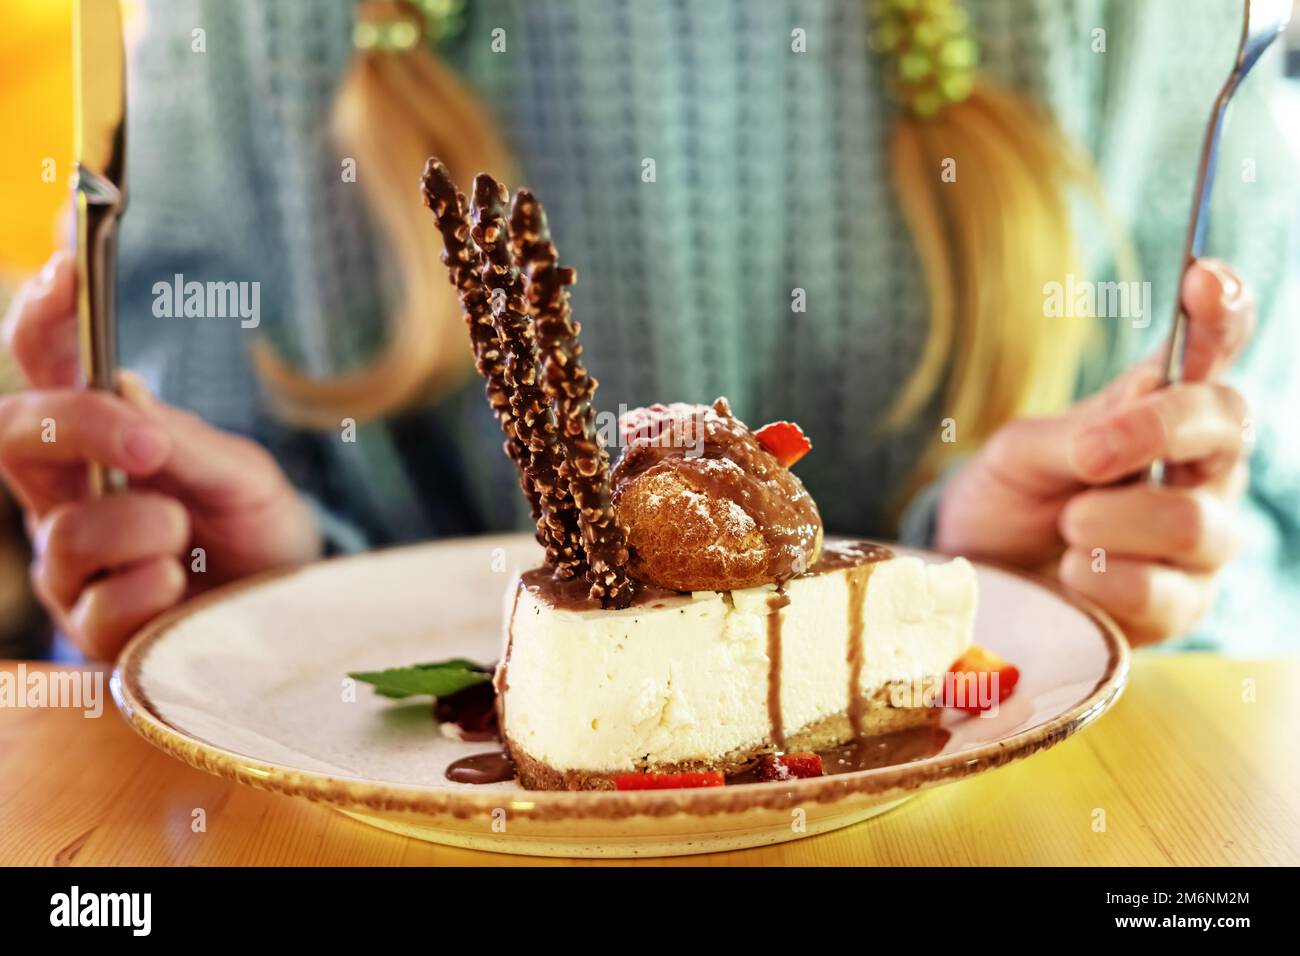 Cheesecake on a plate in a cafe close-up. Fresh appetizing cheesecake on a plate. Selective focus Stock Photo